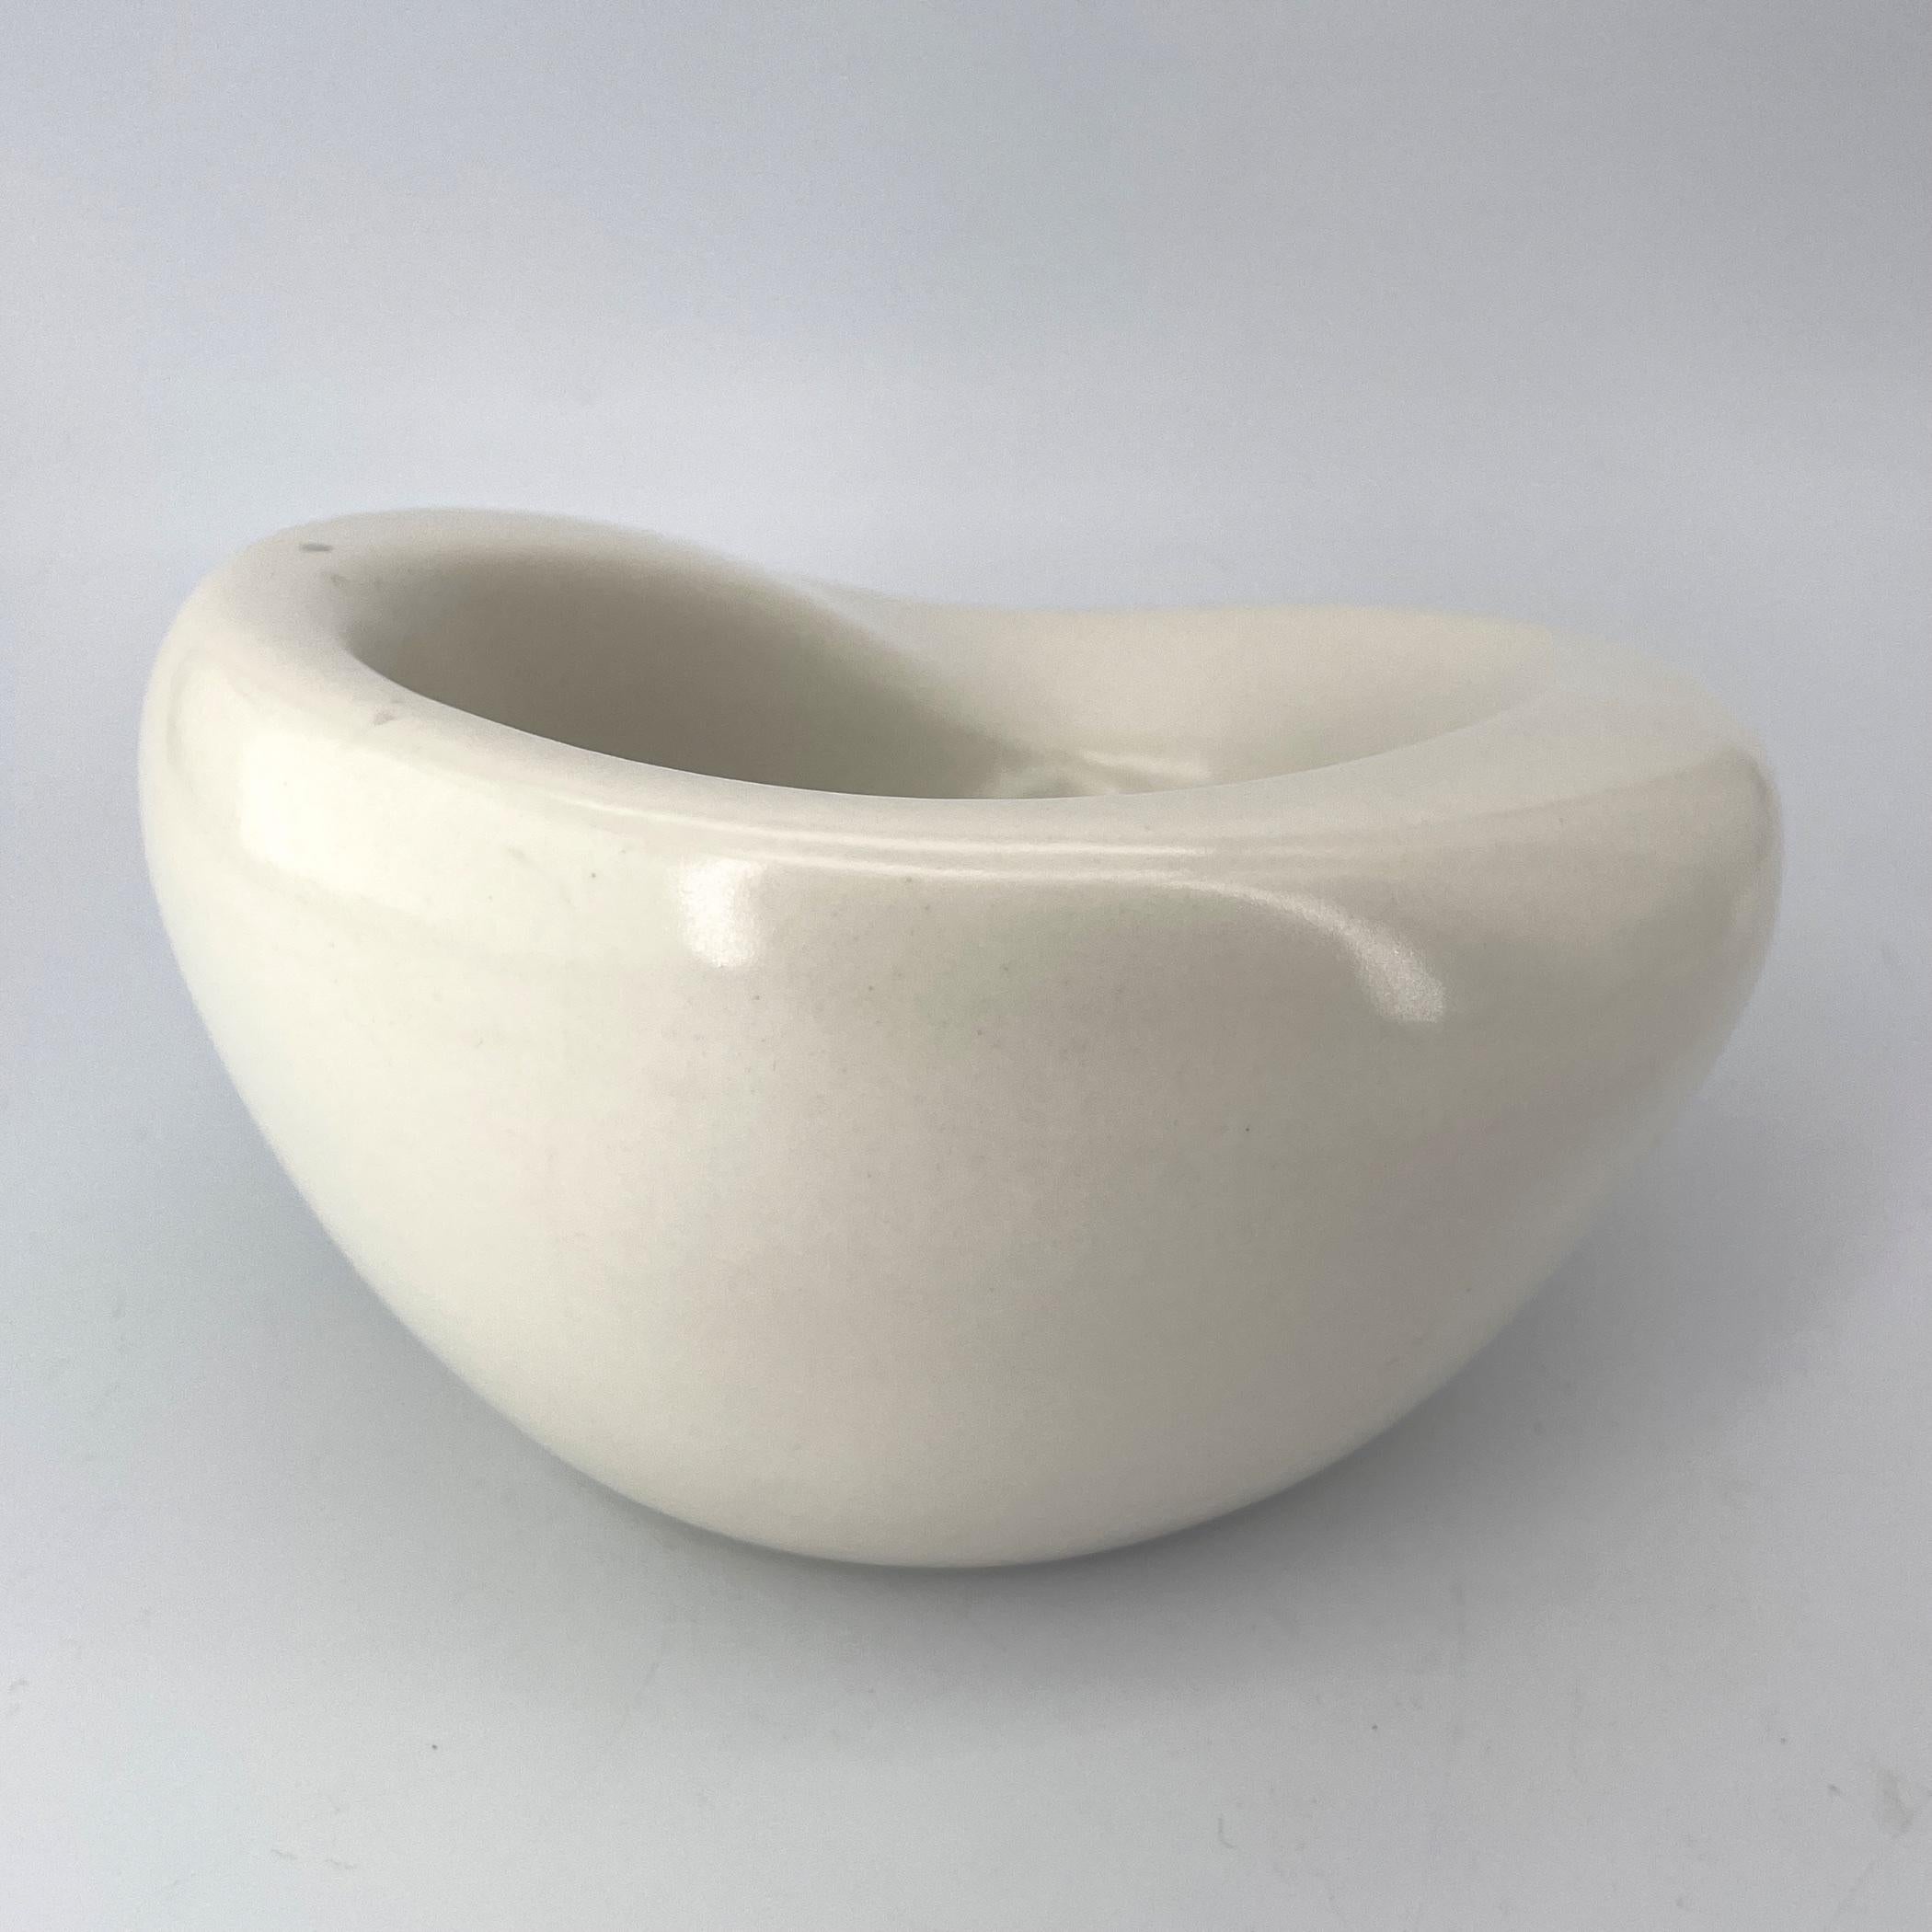 A deep off-white coffee table pottery bowl with abstract volcanic bottom interior. Heavily influenced by the work of Georges Jouve, with the thick freeform walls.